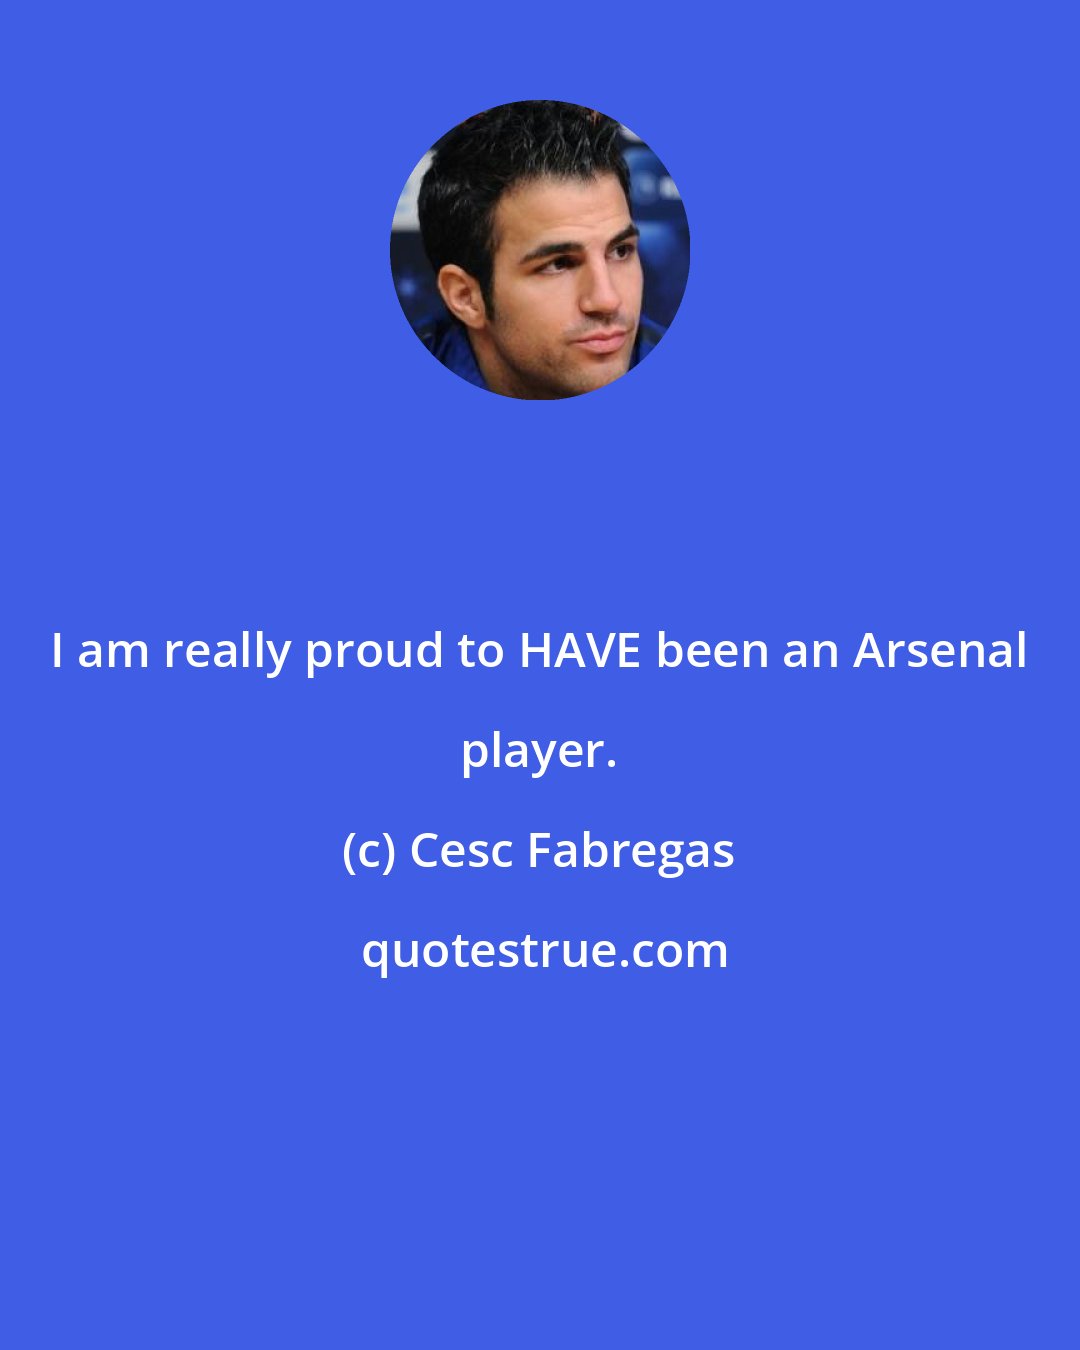 Cesc Fabregas: I am really proud to HAVE been an Arsenal player.